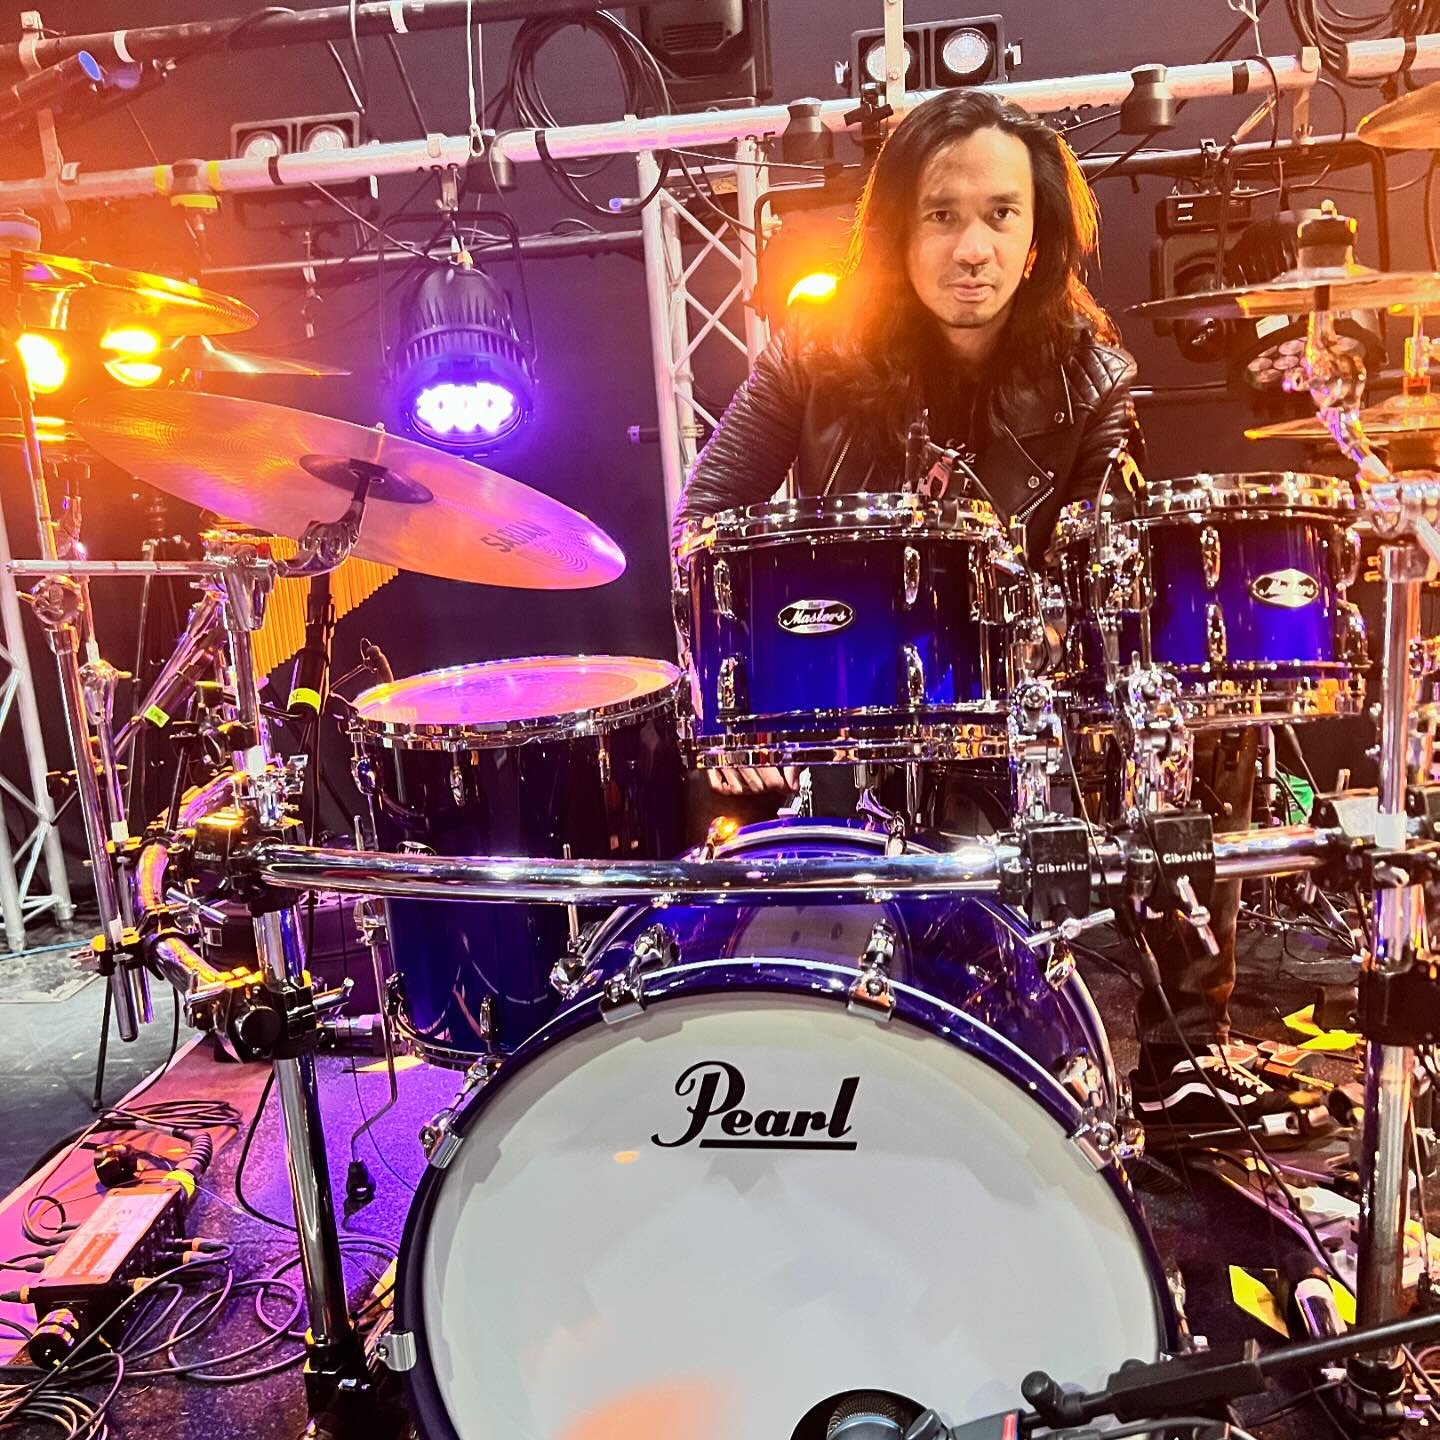 UK shows are done and now we start the EU shows. So many amazing and very welcoming people I&rsquo;ve met so far on this tour. 

We arrived in Oberhausen, Germany 🇩🇪 
#drums #drummer #tour